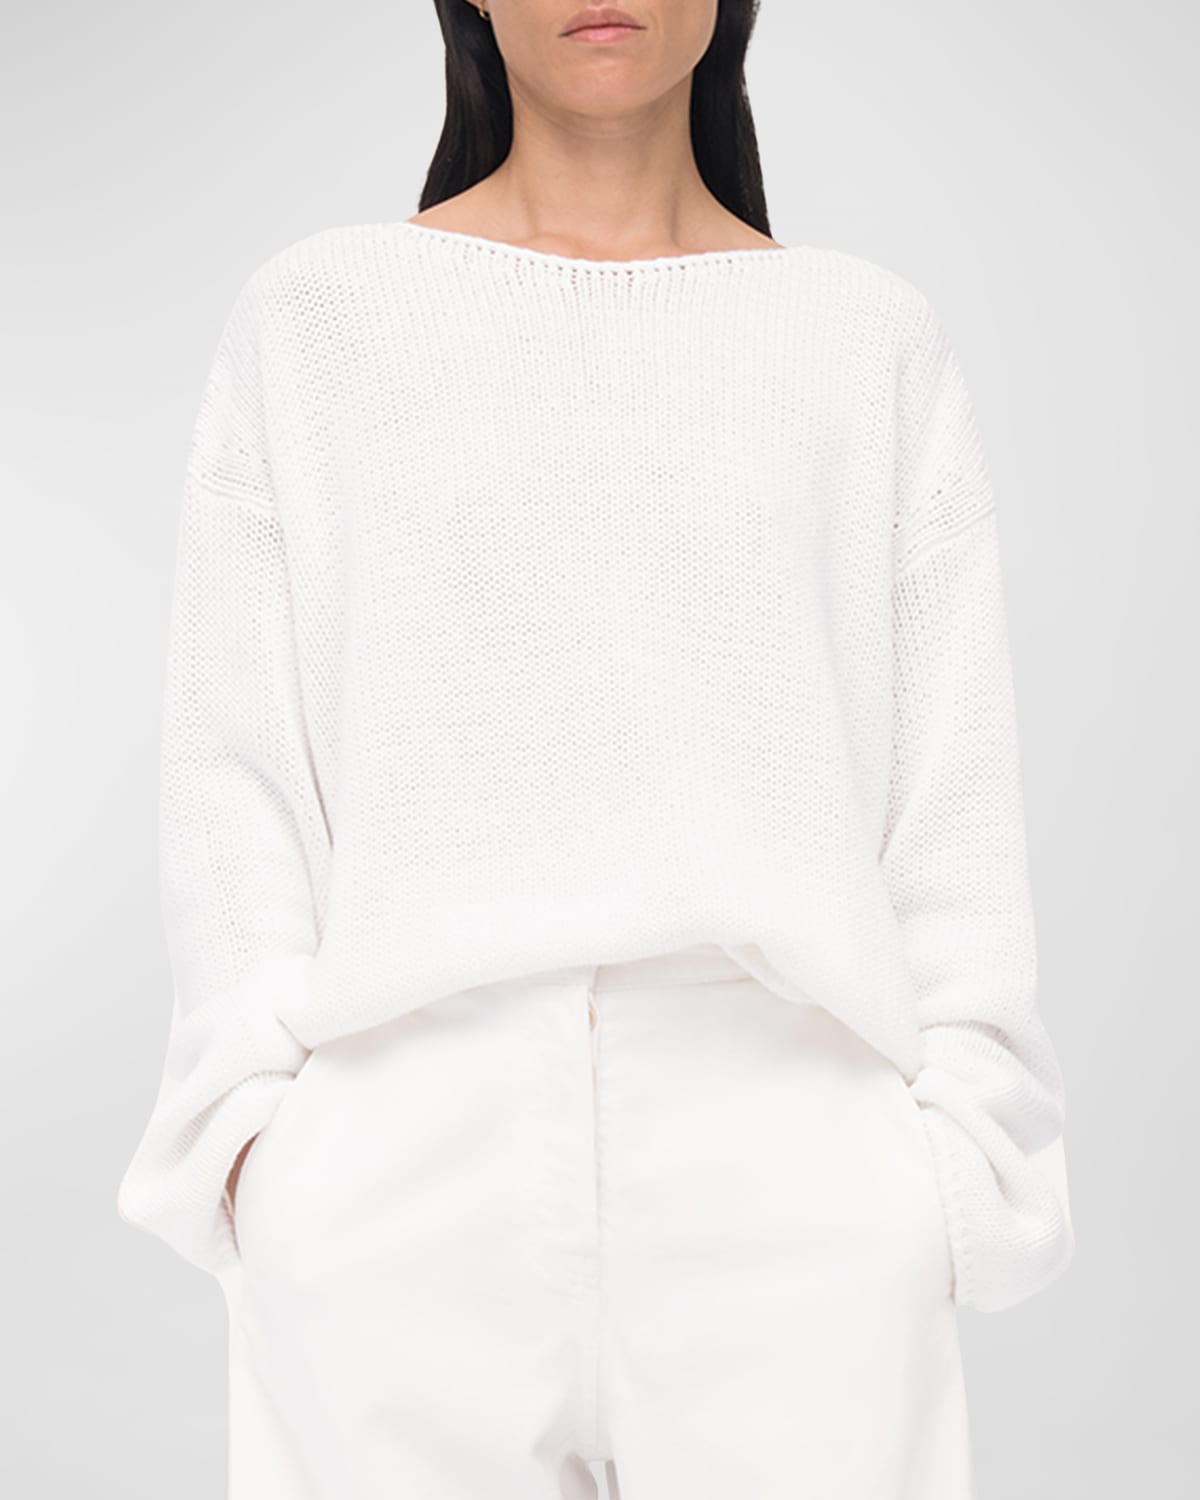 Another Tomorrow Draped Knit Sweater In White